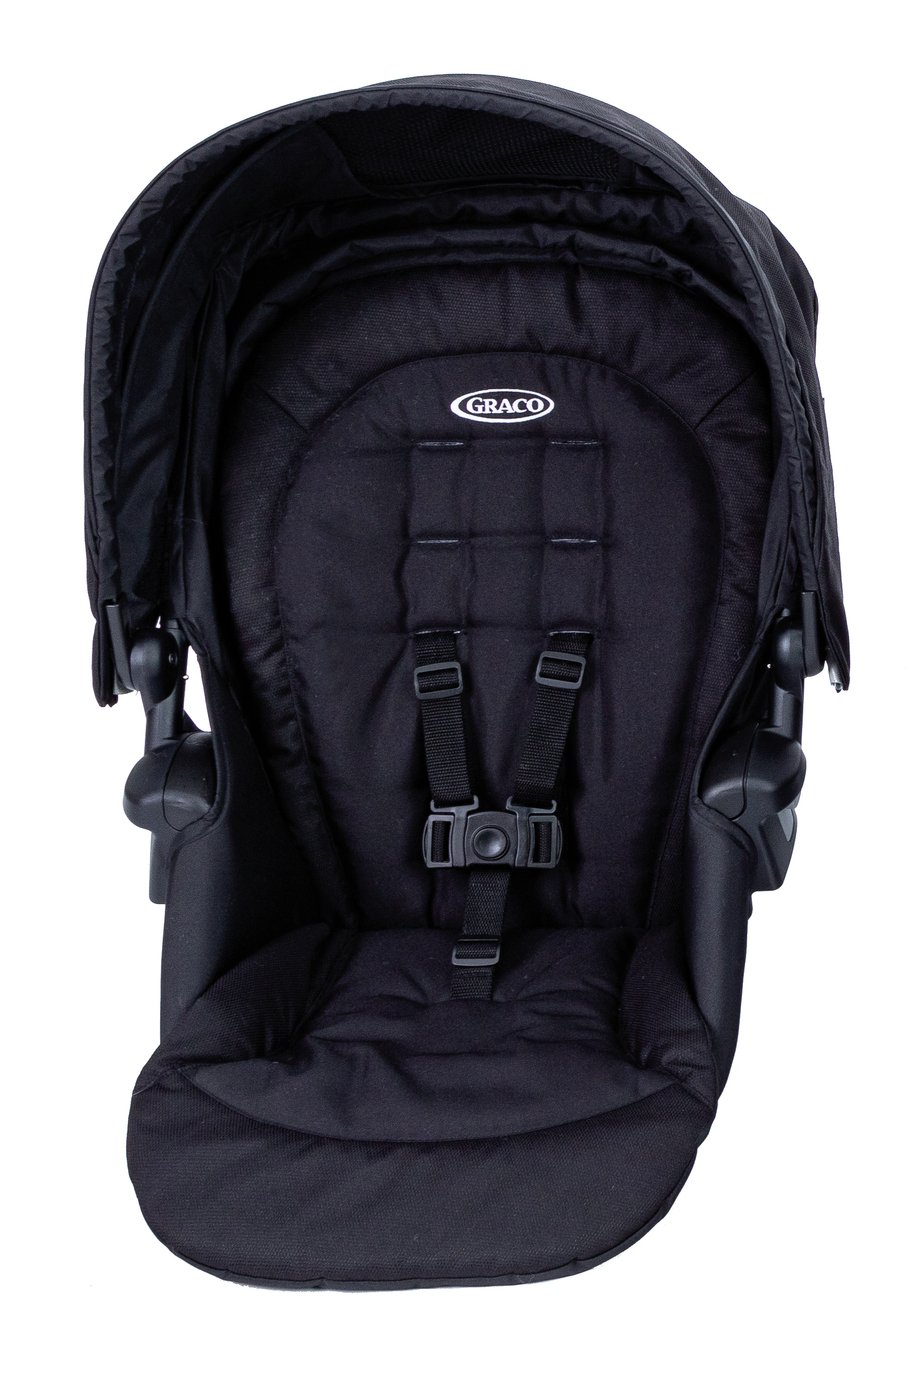 Graco Time2Grow Toddler Seat Review